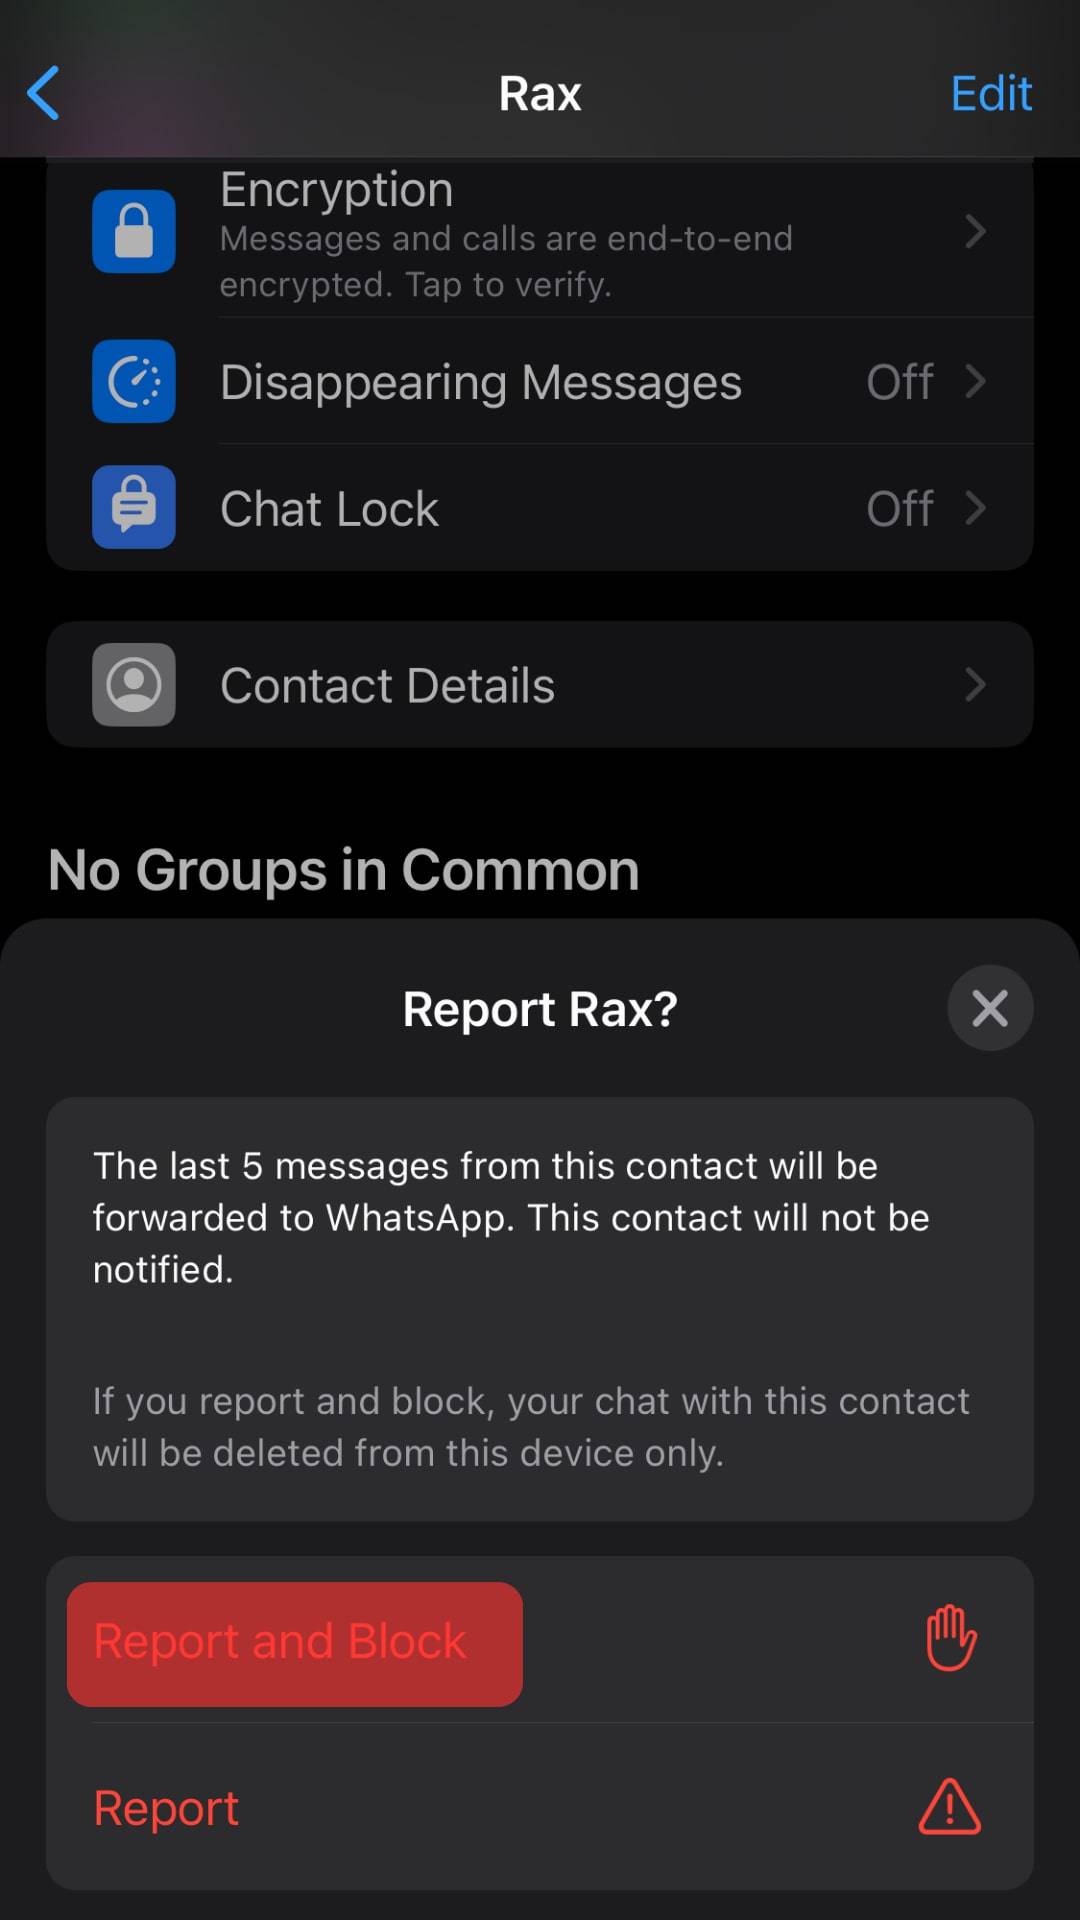 Hit The Report And Block Option.